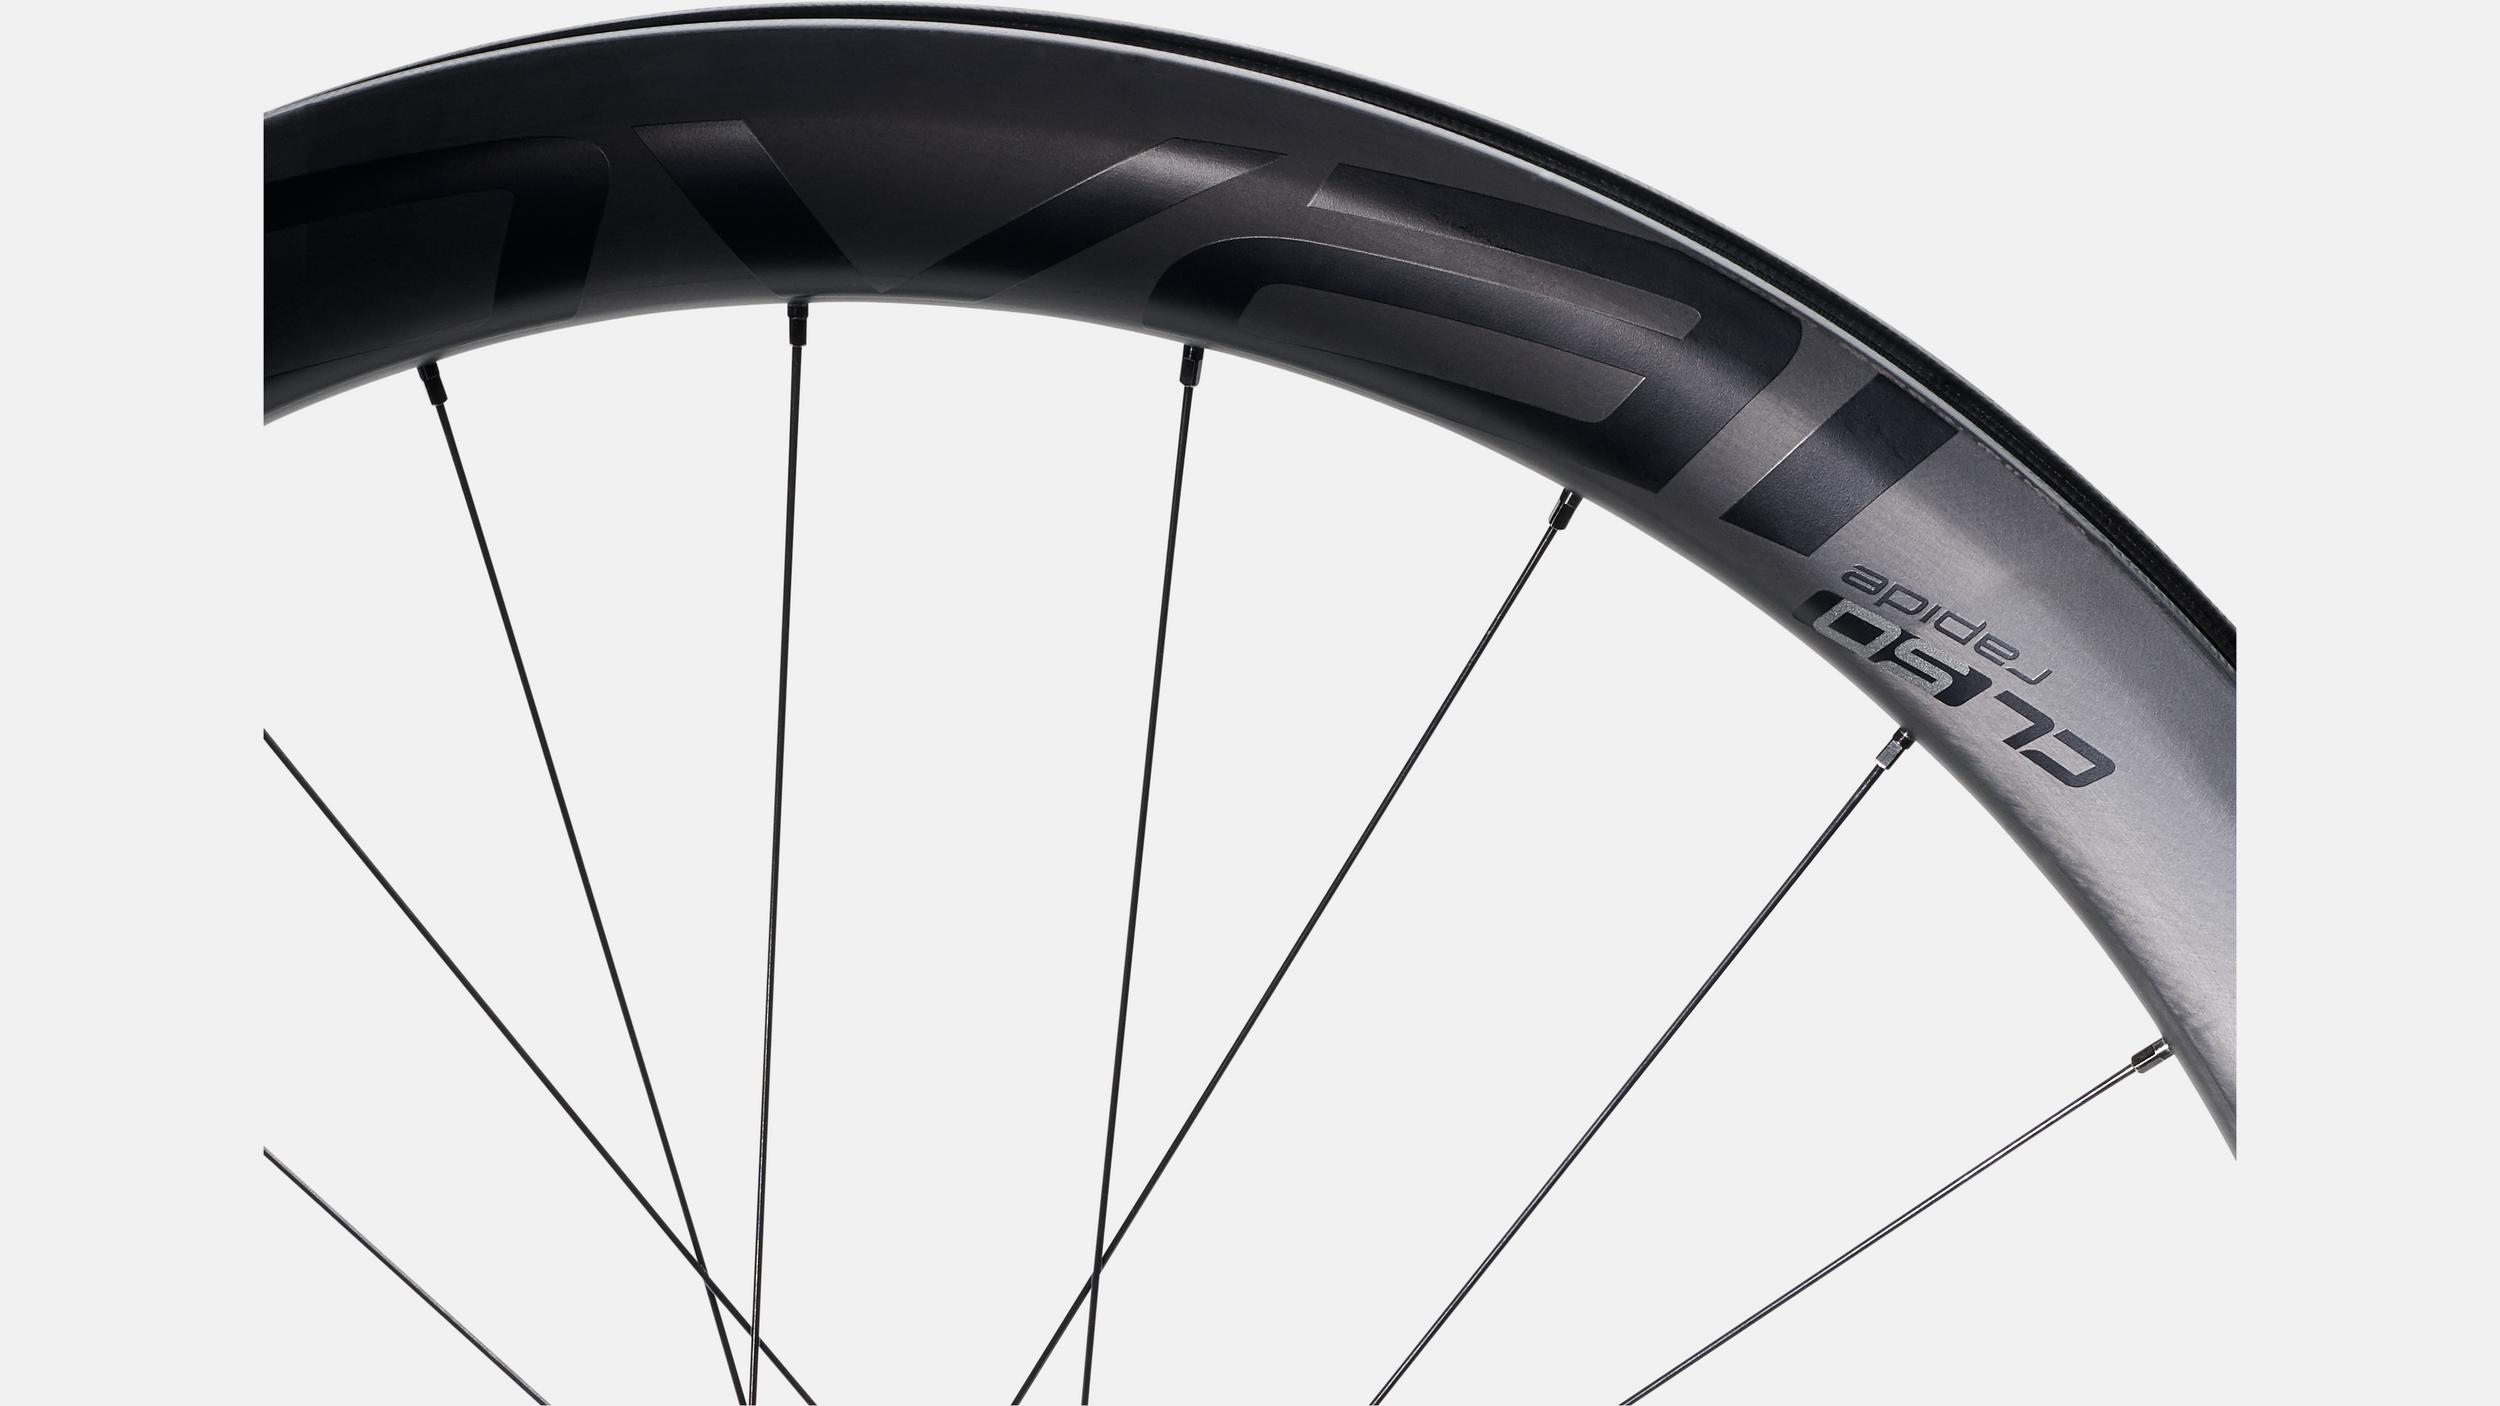 Roval CL 50 Disc Wheelset | Specialized.com